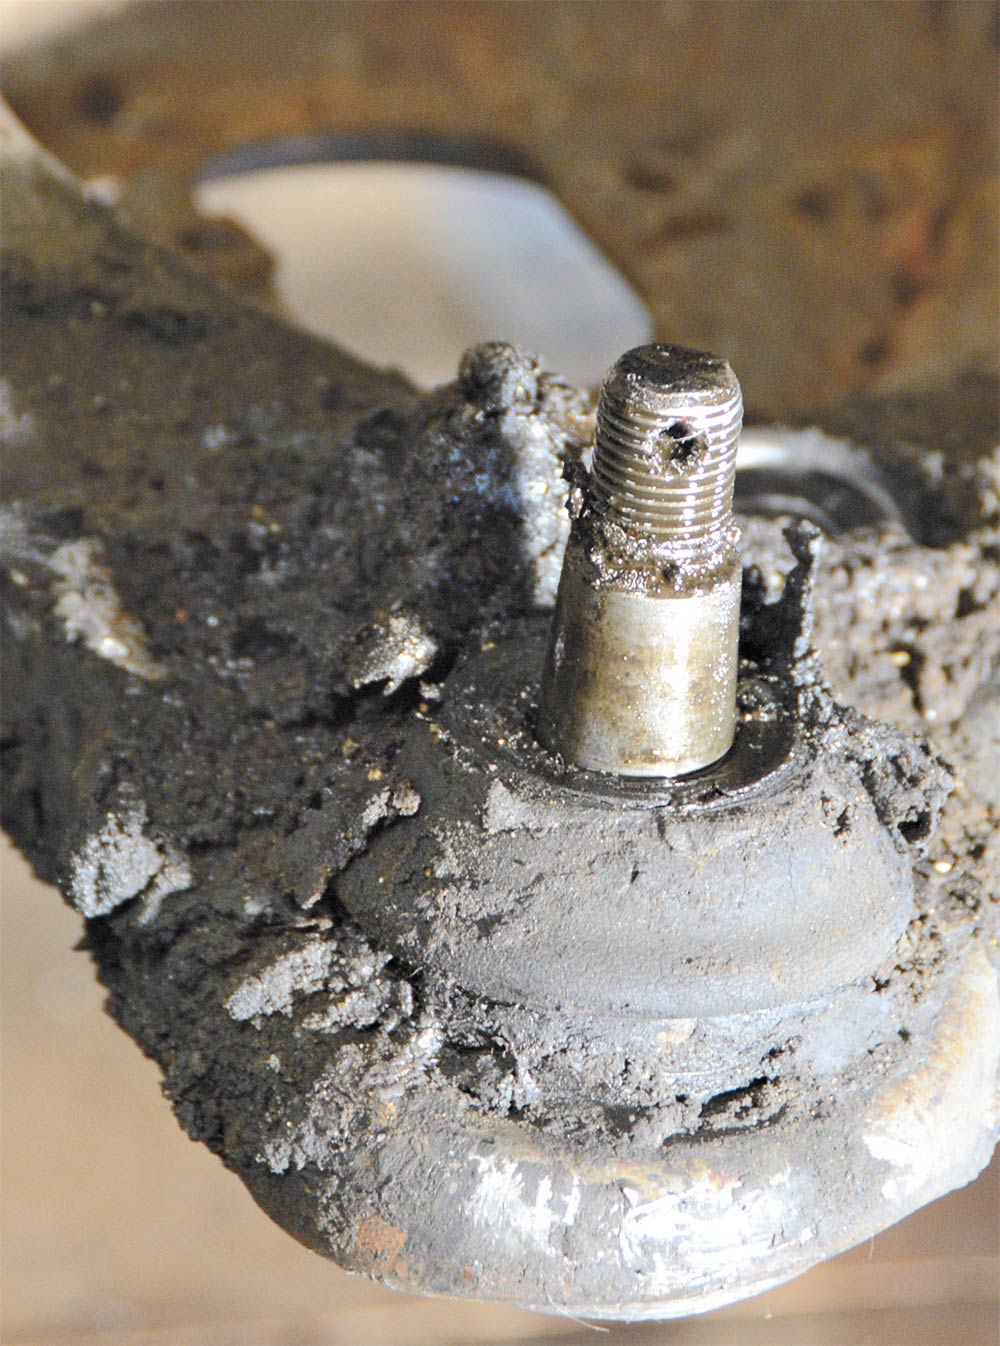 view of gobs of grease around a ball joint